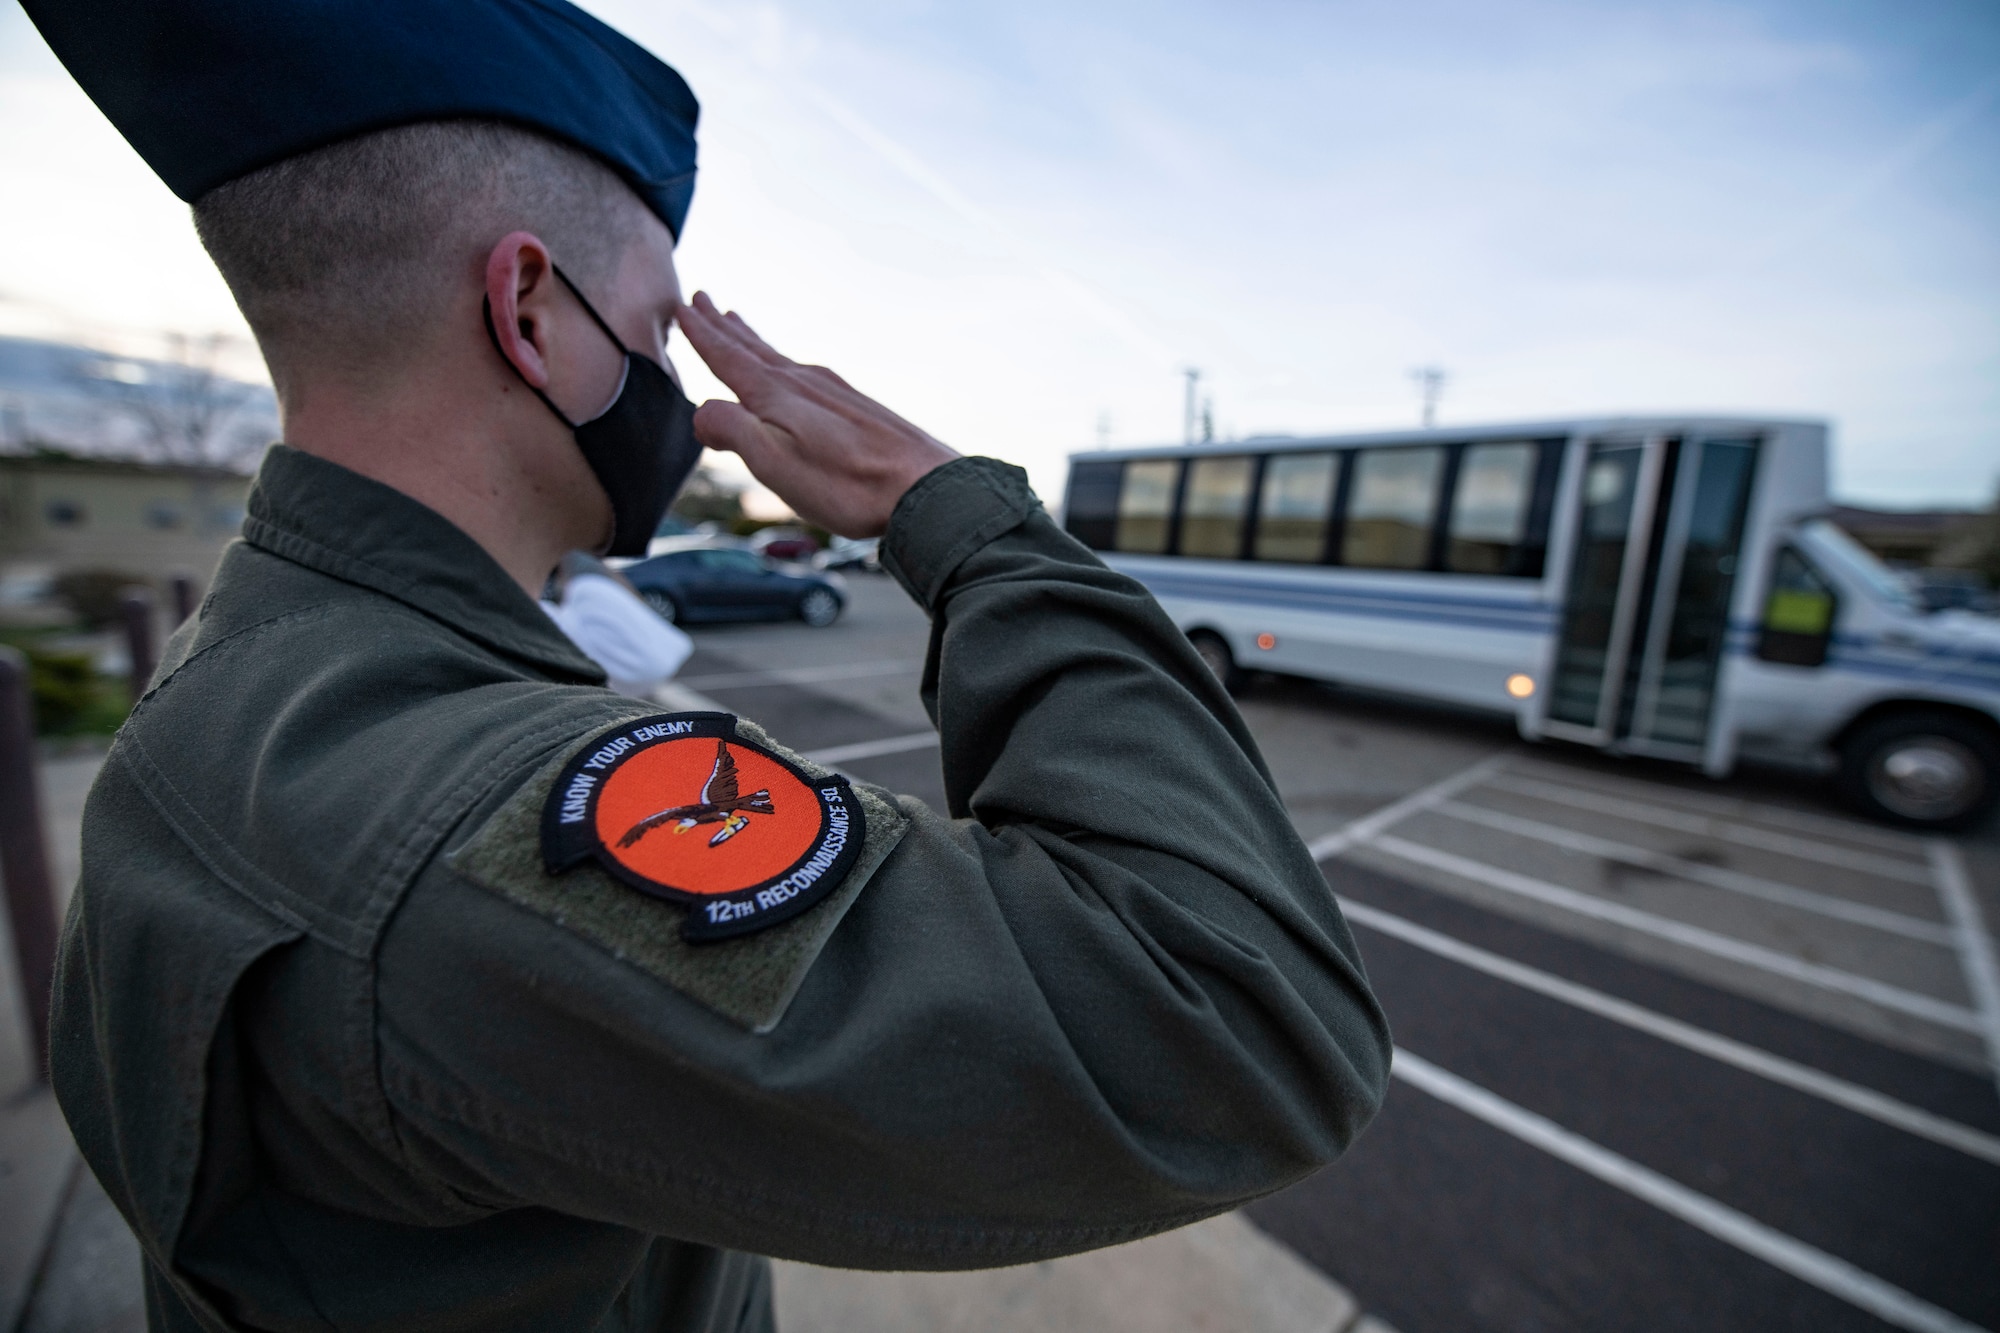 An airman from the 12th Reconnaissance Squadron (RS) salutes the bus carrying Chief Master Sgt. of the Air Force JoAnne Bass as it arrives at a dining facility on Beale Air Force Base.